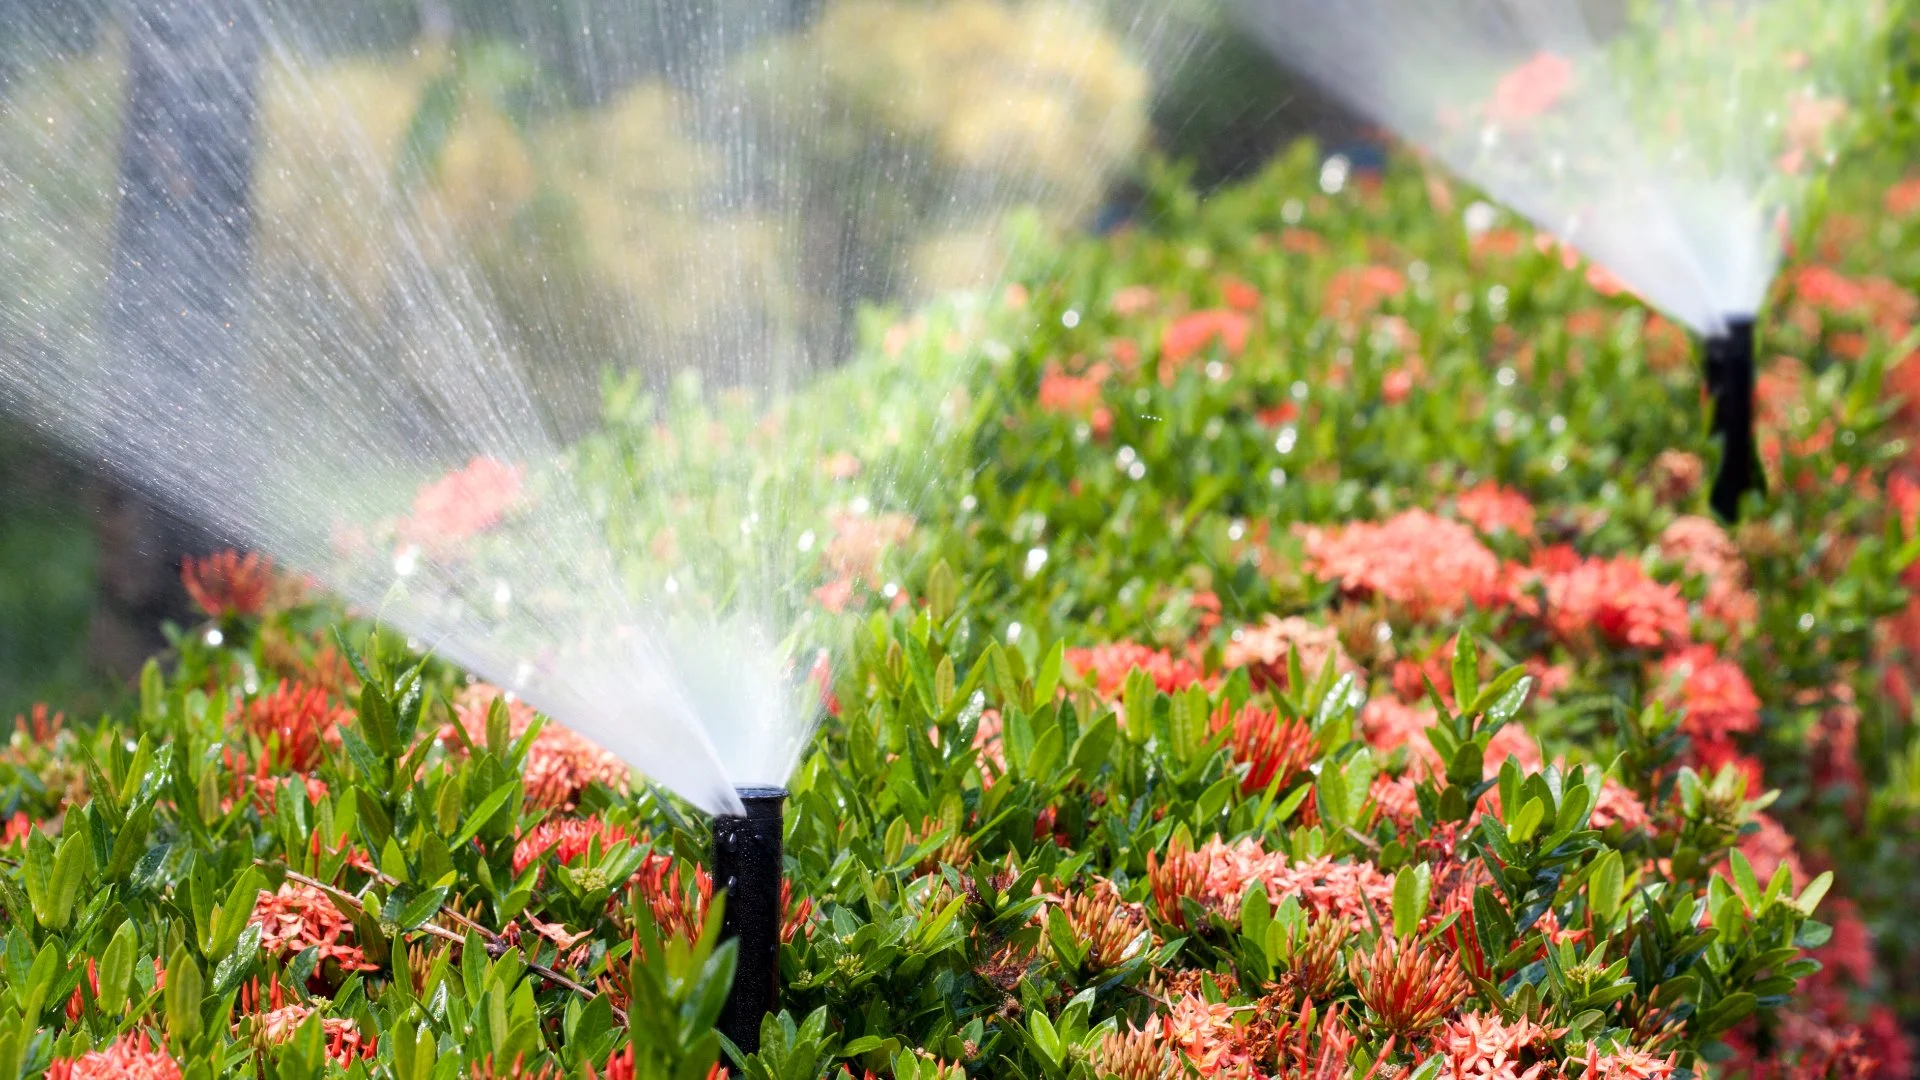 Irrigation system watering a hedge in Edgewater, NJ.